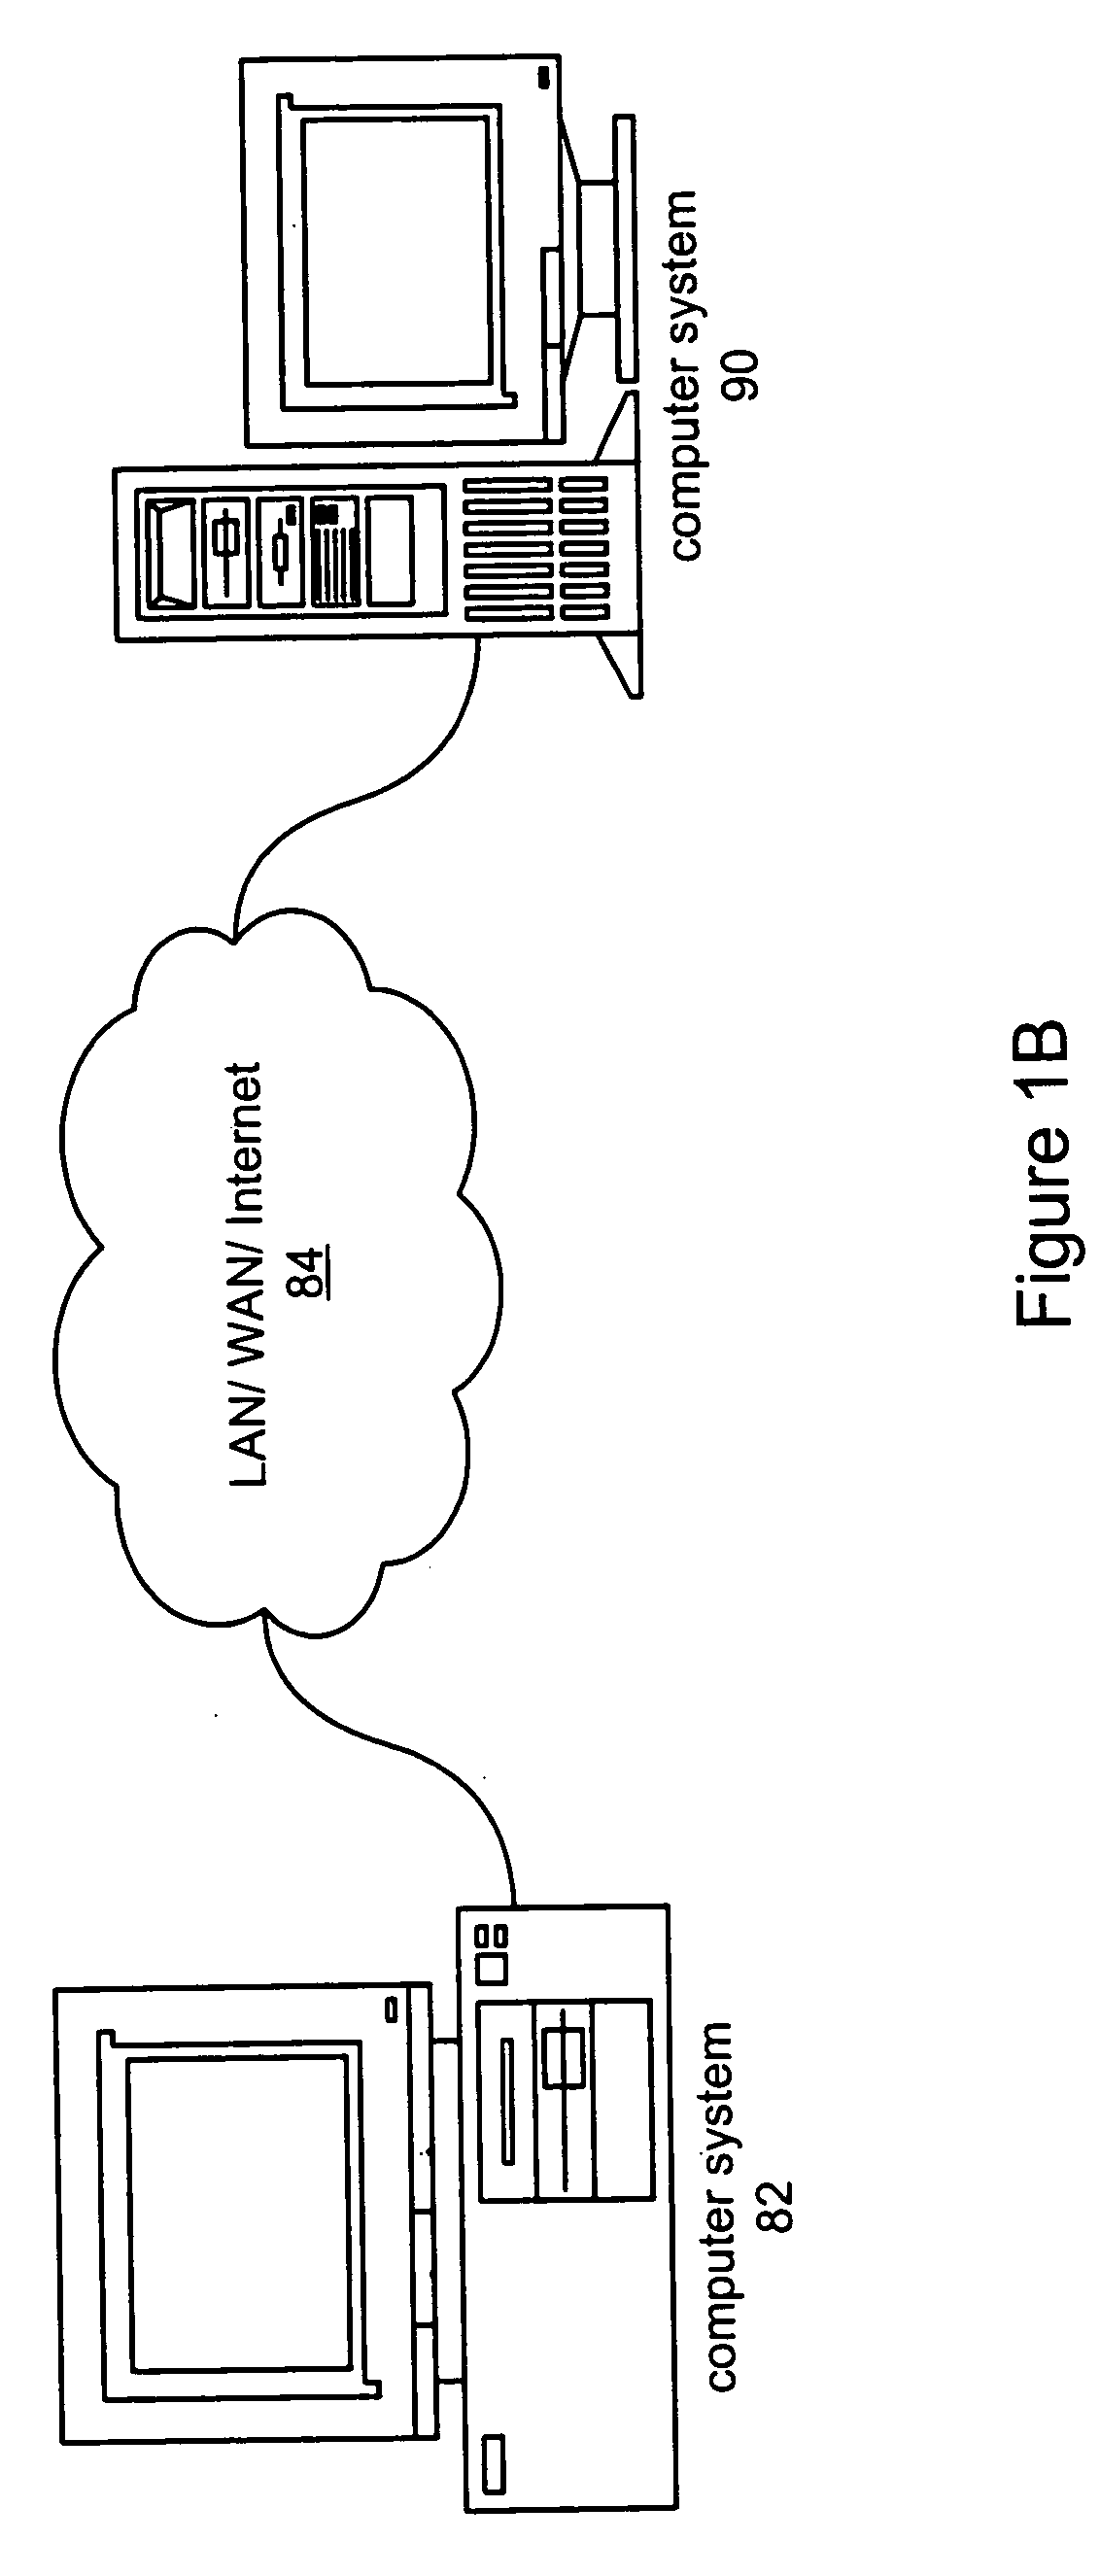 Automatic configuration of function blocks in a signal analysis system